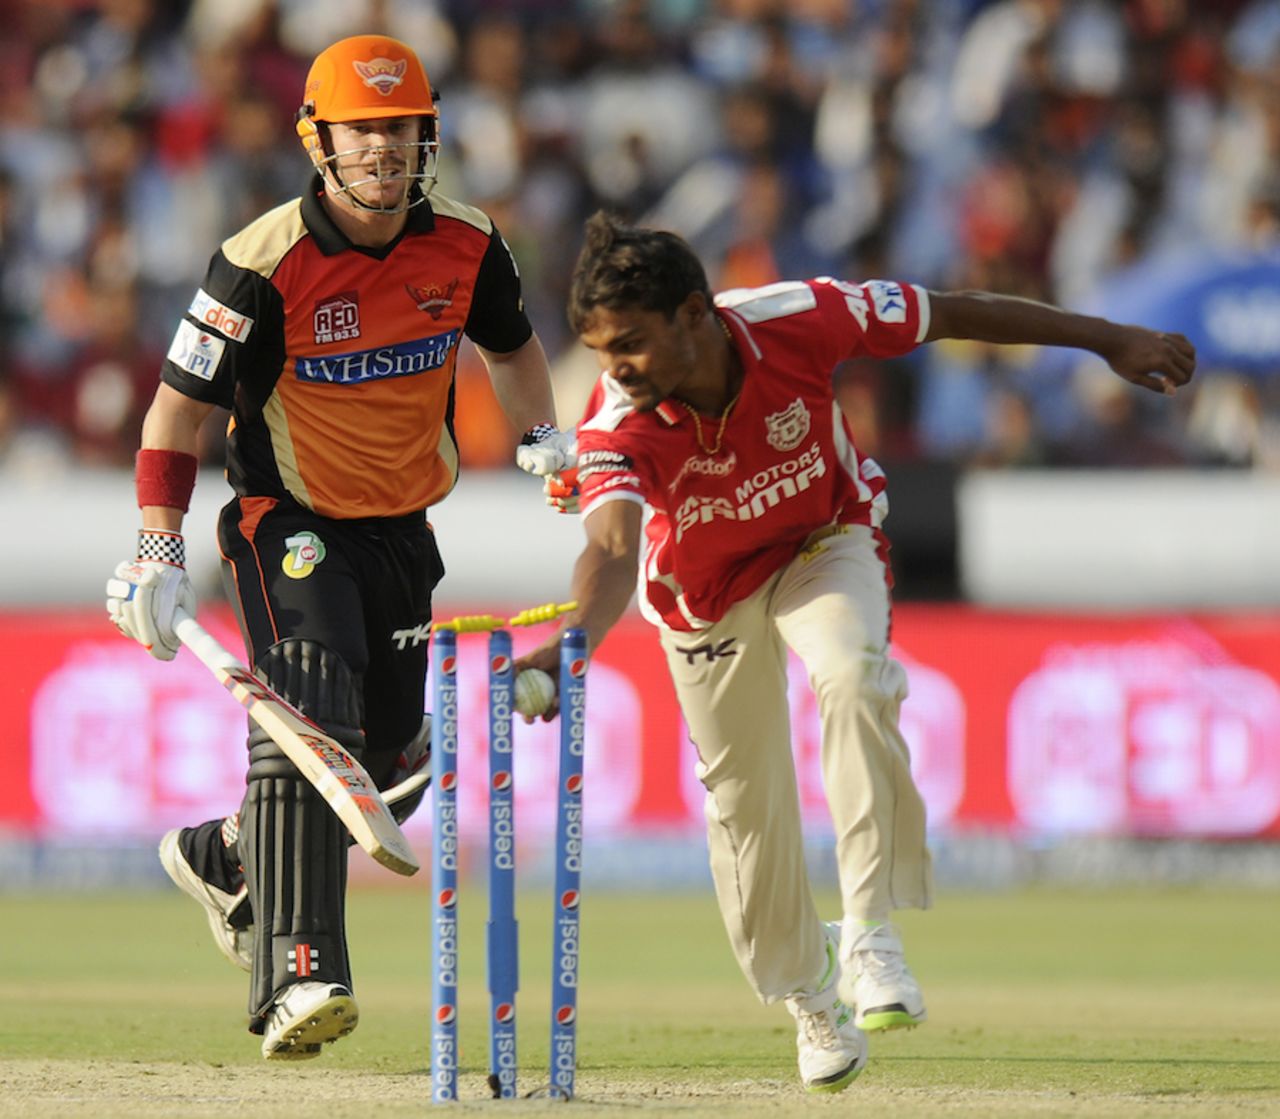 David Warner was stranded in the middle and was run out, Sunrisers Hyderabad v Kings XI Punjab, IPL 2014, Hyderabad, May 14, 2014